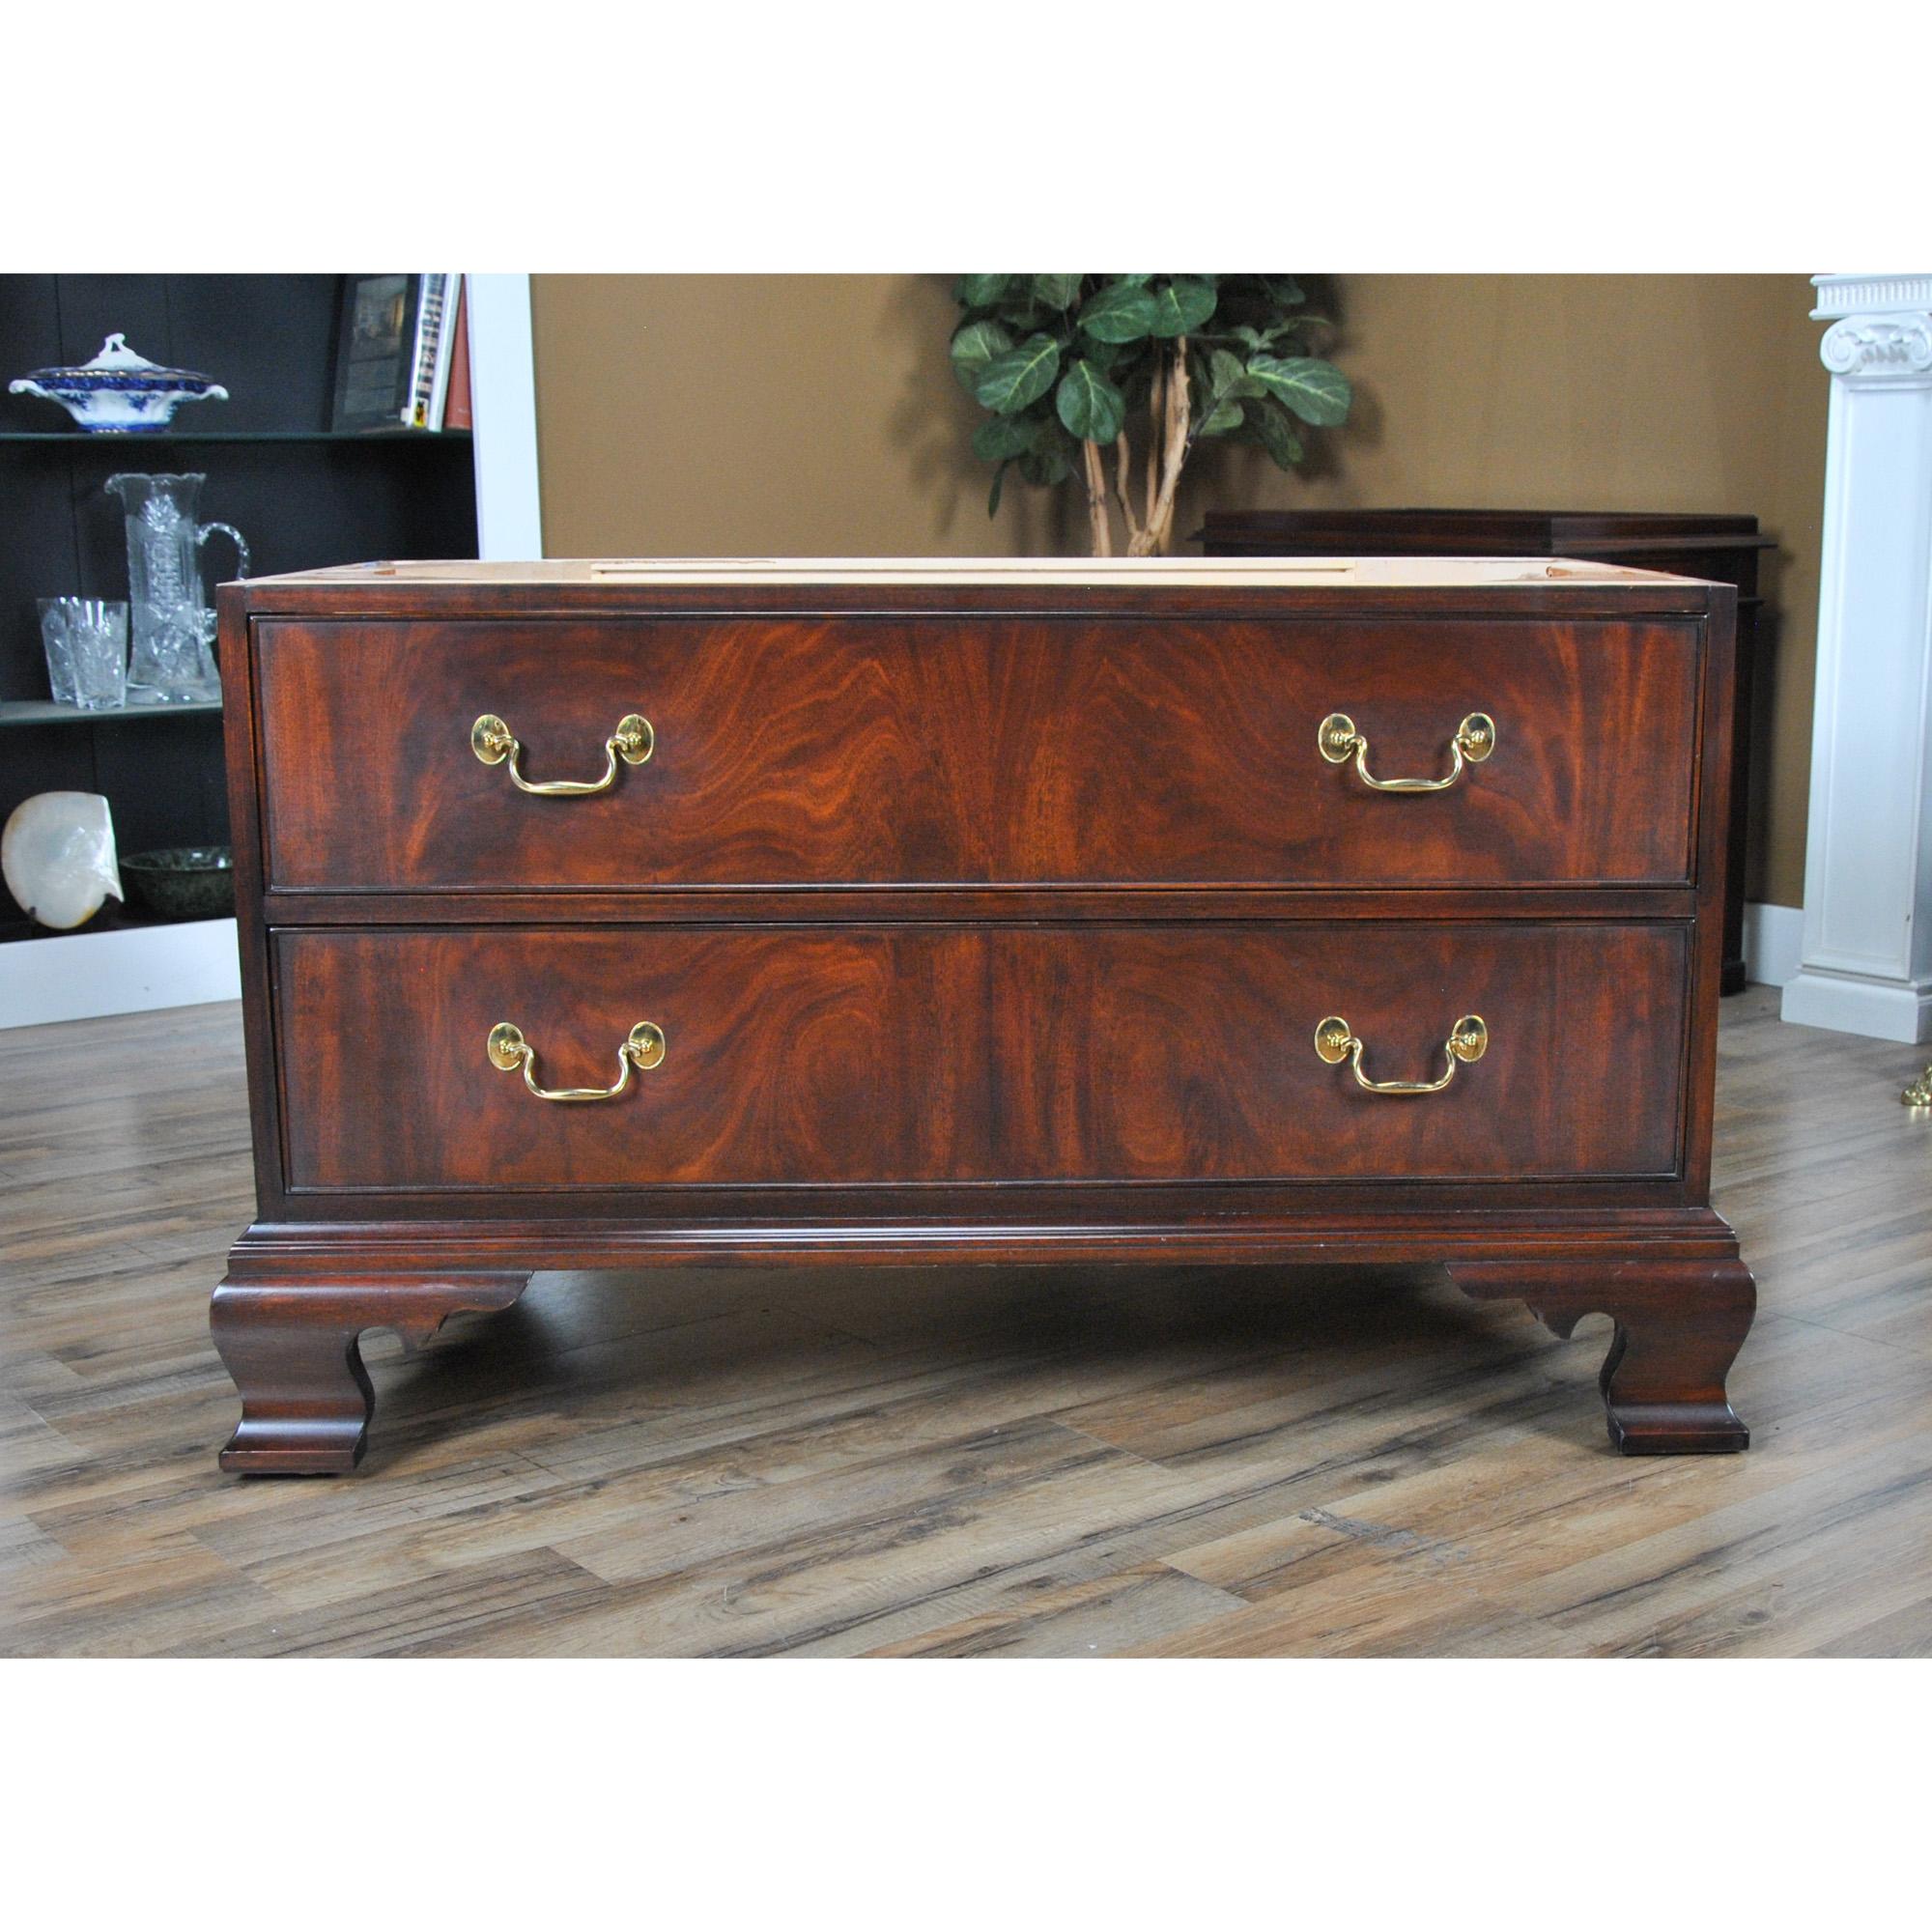 A vintage Henkel Harris Entertainment Center in excellent original, as found, condition.

Simple yet sophisticated, this beautiful Henkel Harris Entertainment Center has everything going for it and could easily be converted into a bar by adding